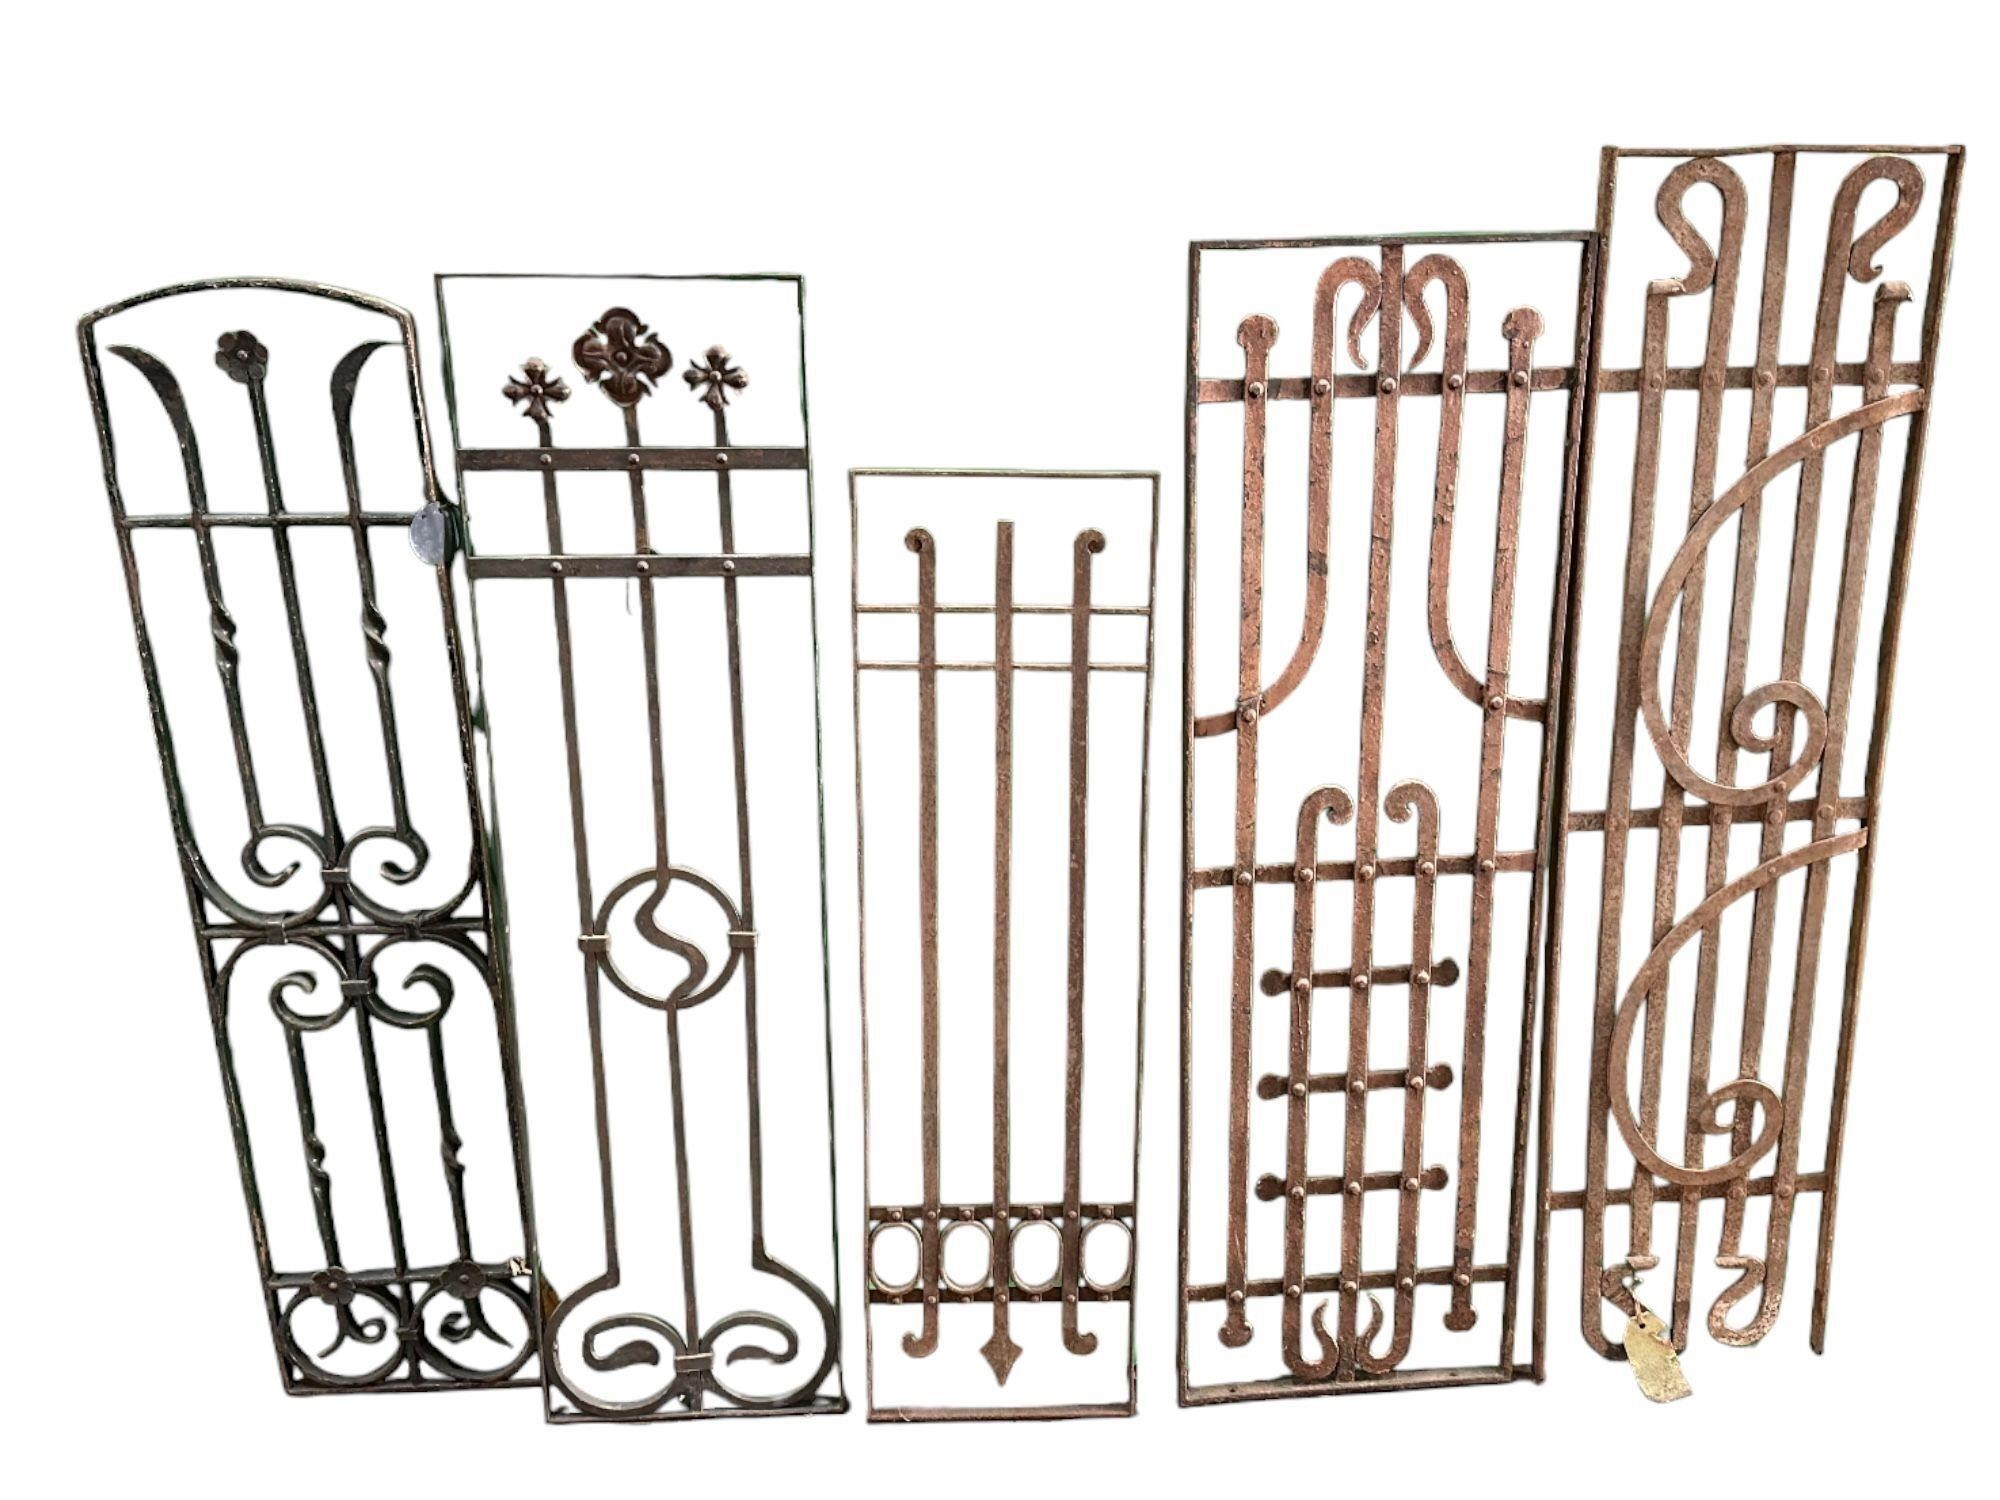 Group of 5 French Wrought Iron Panels